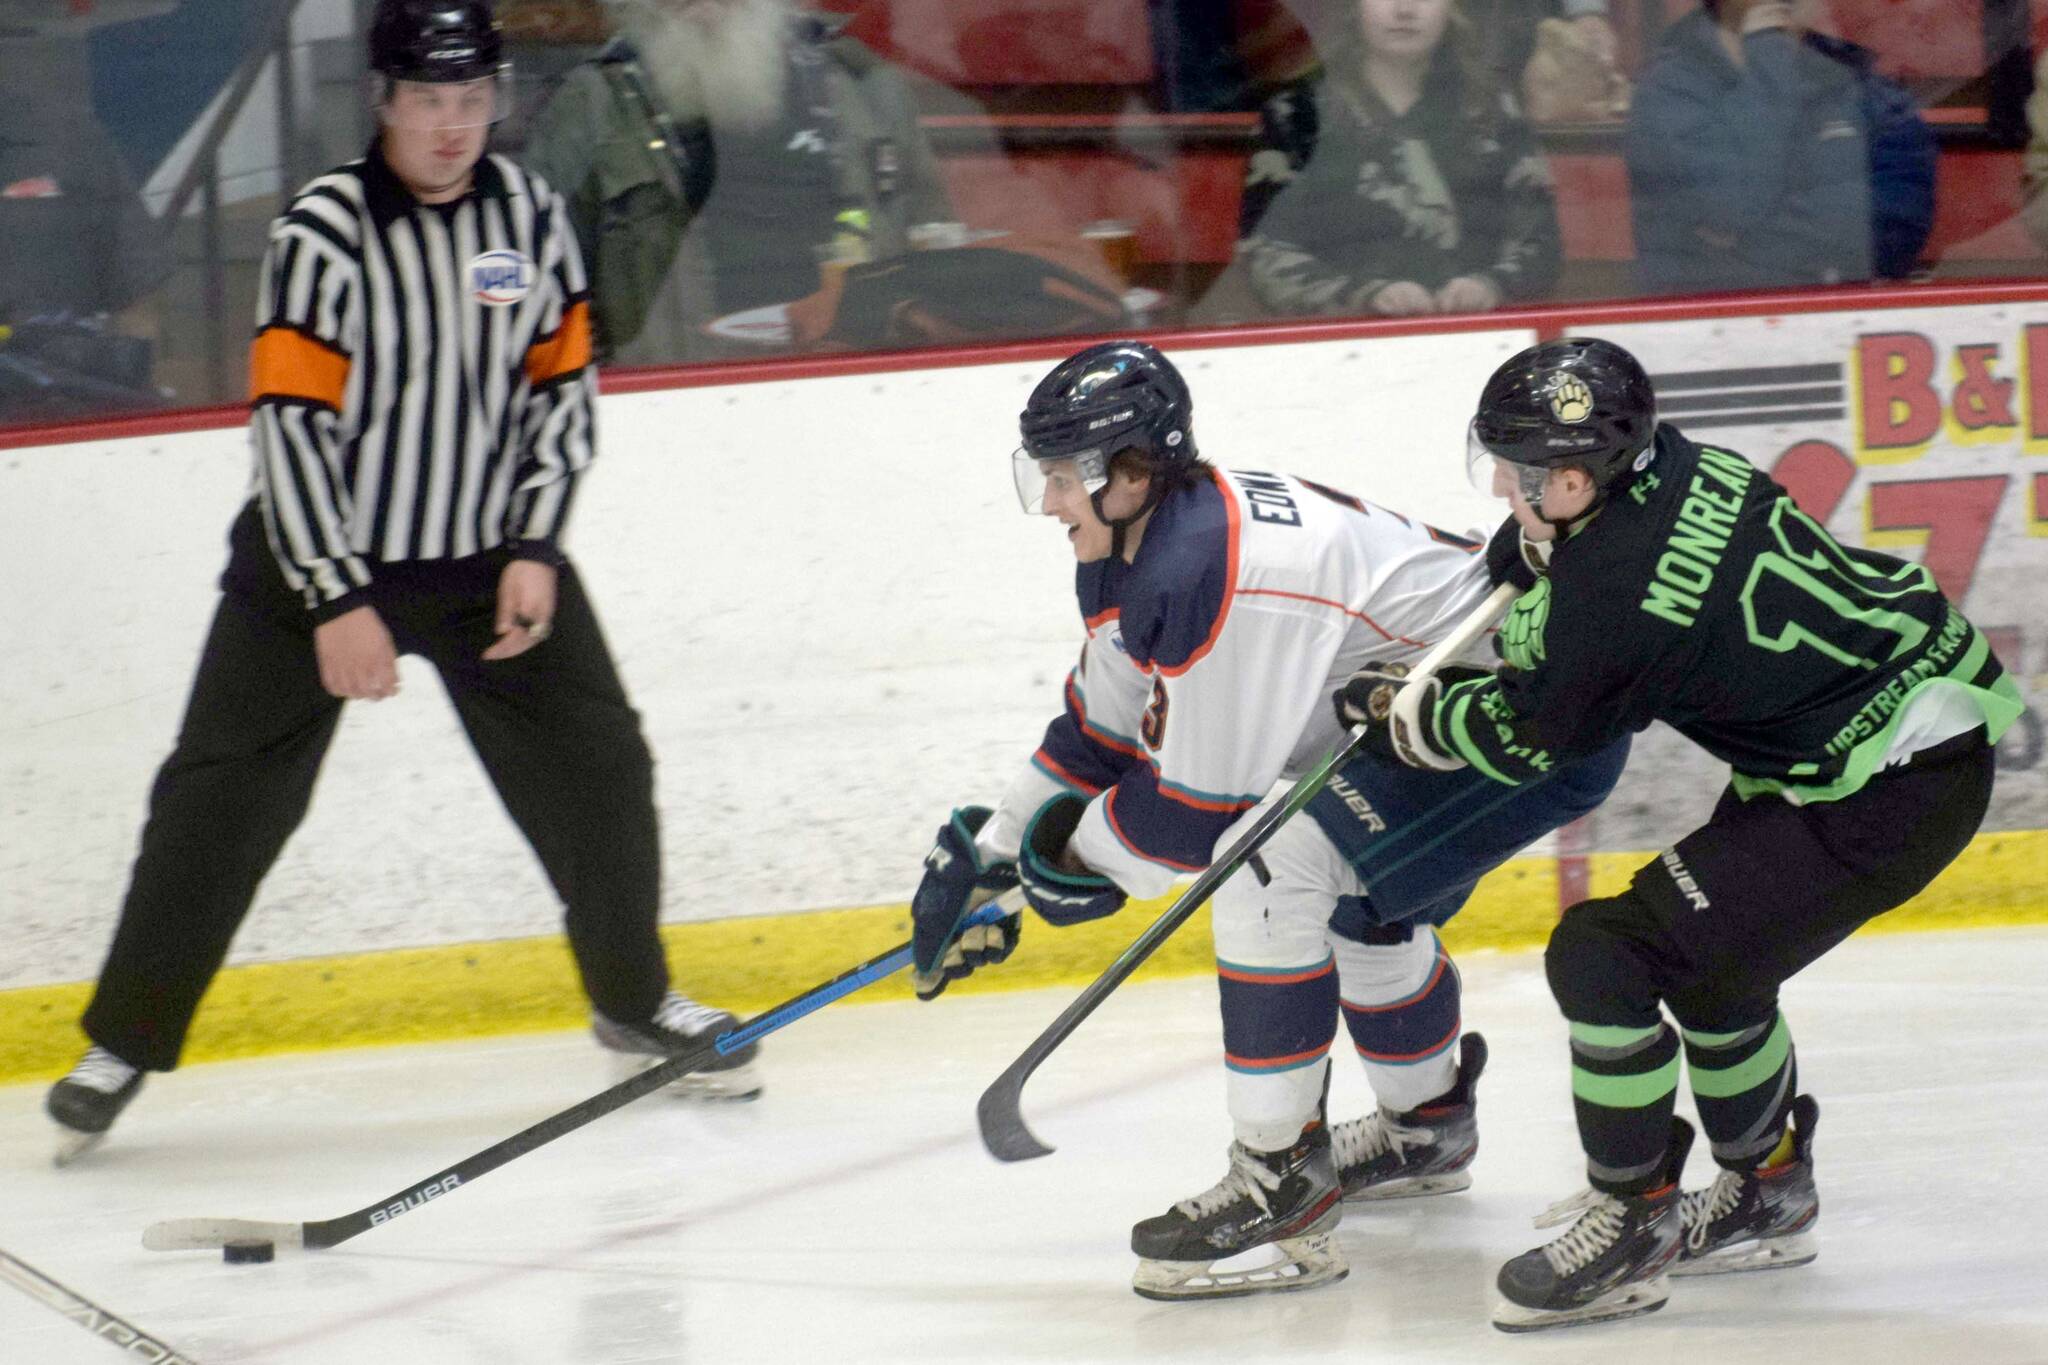 Anchorage Wolverines defenseman Ben Edwards shields the puck from Kenai River Brown Bears forward Bryce Monrean on Friday, Feb. 18, 2022, at the Soldotna Regional Sports Complex in Soldotna, Alaska. (Photo by Camille Botello/Peninsula Clarion)